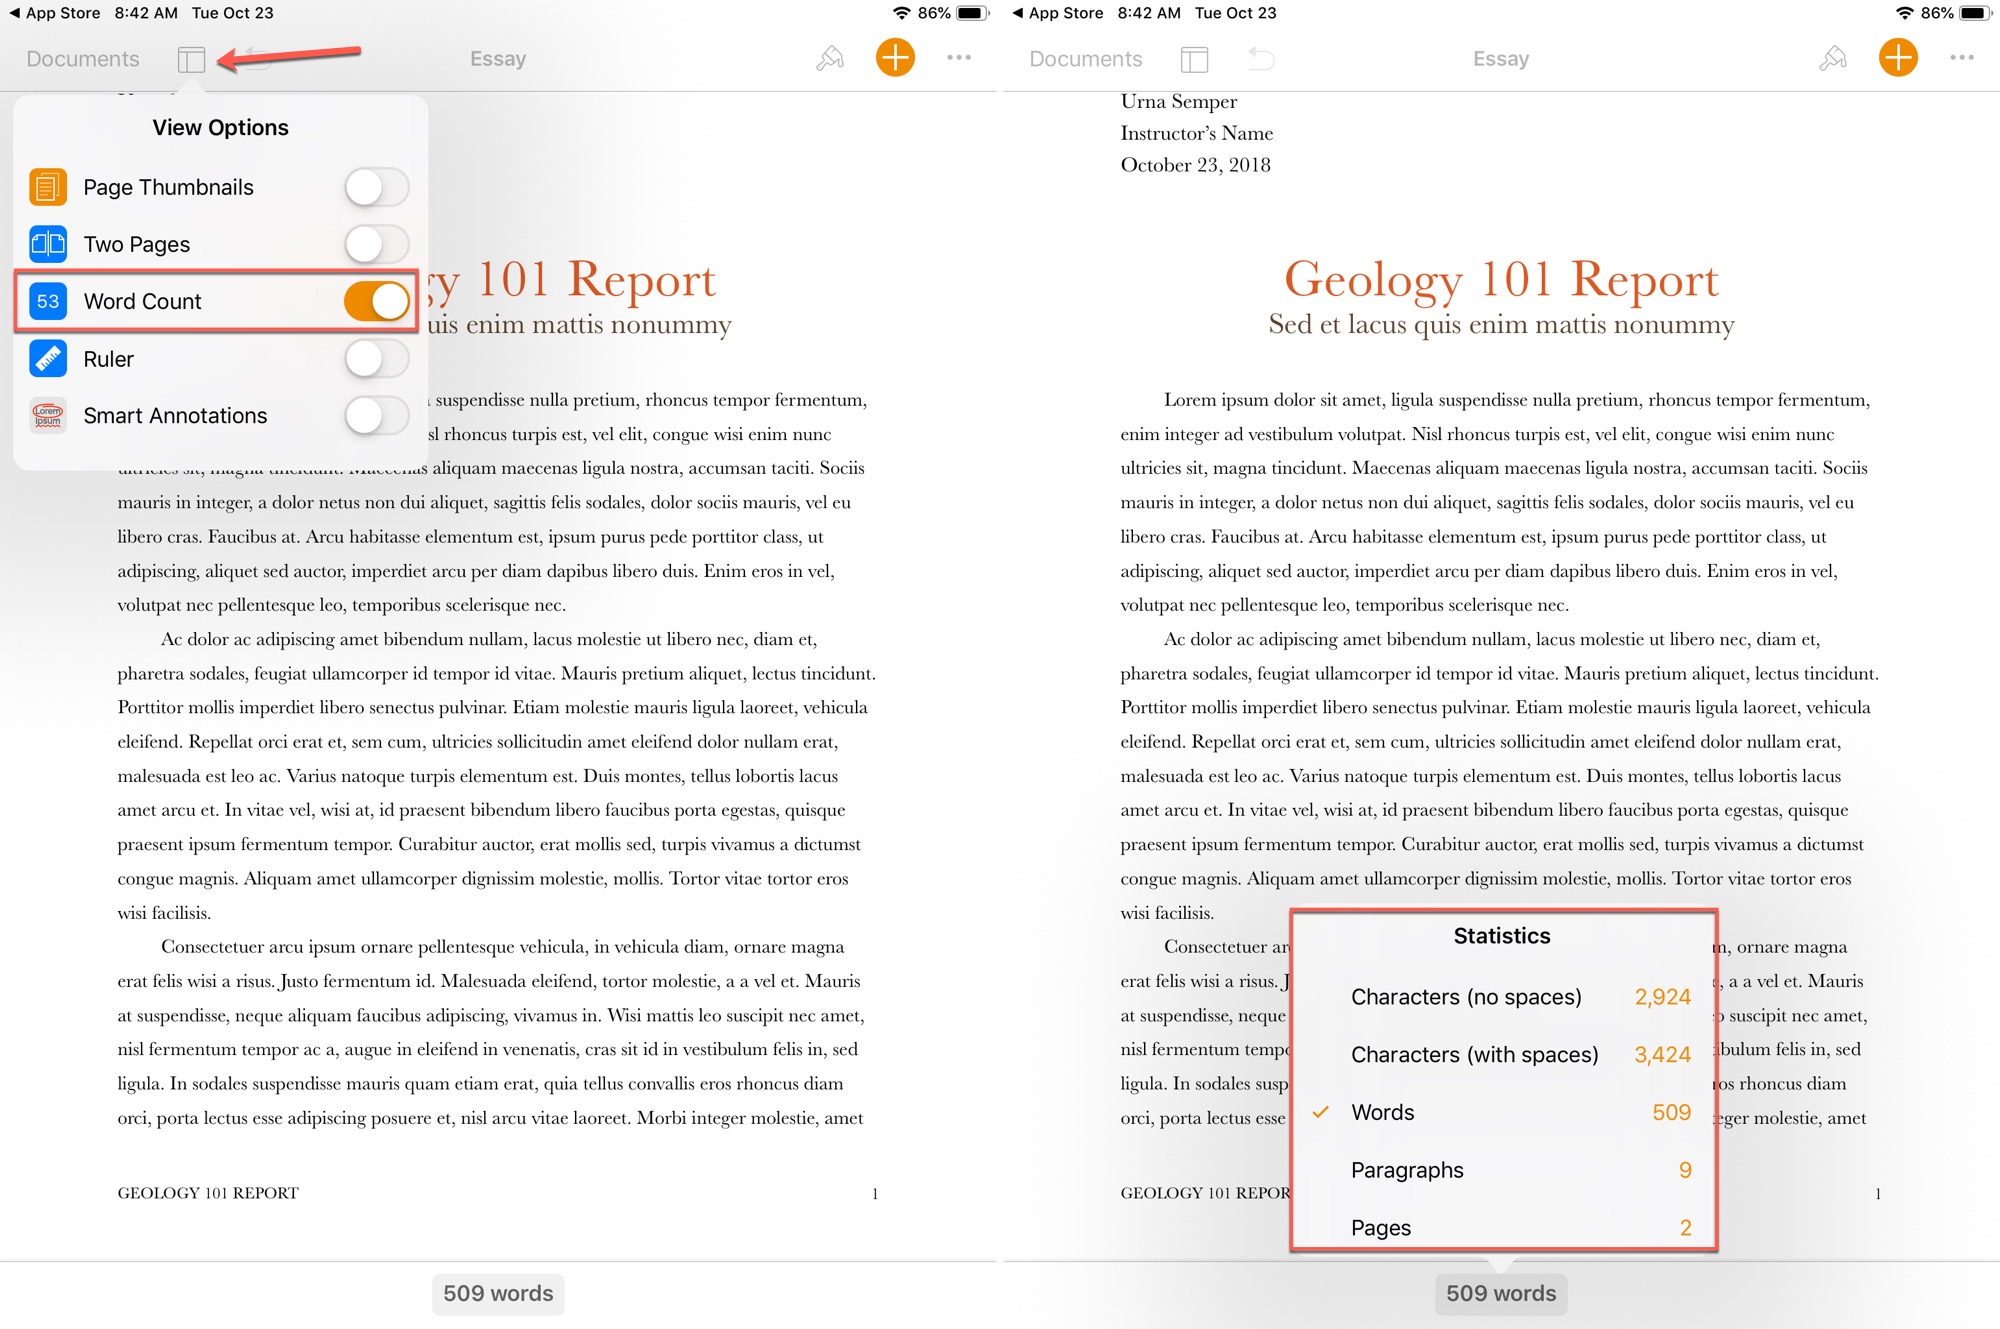 How to find Word Count in Pages on iPad